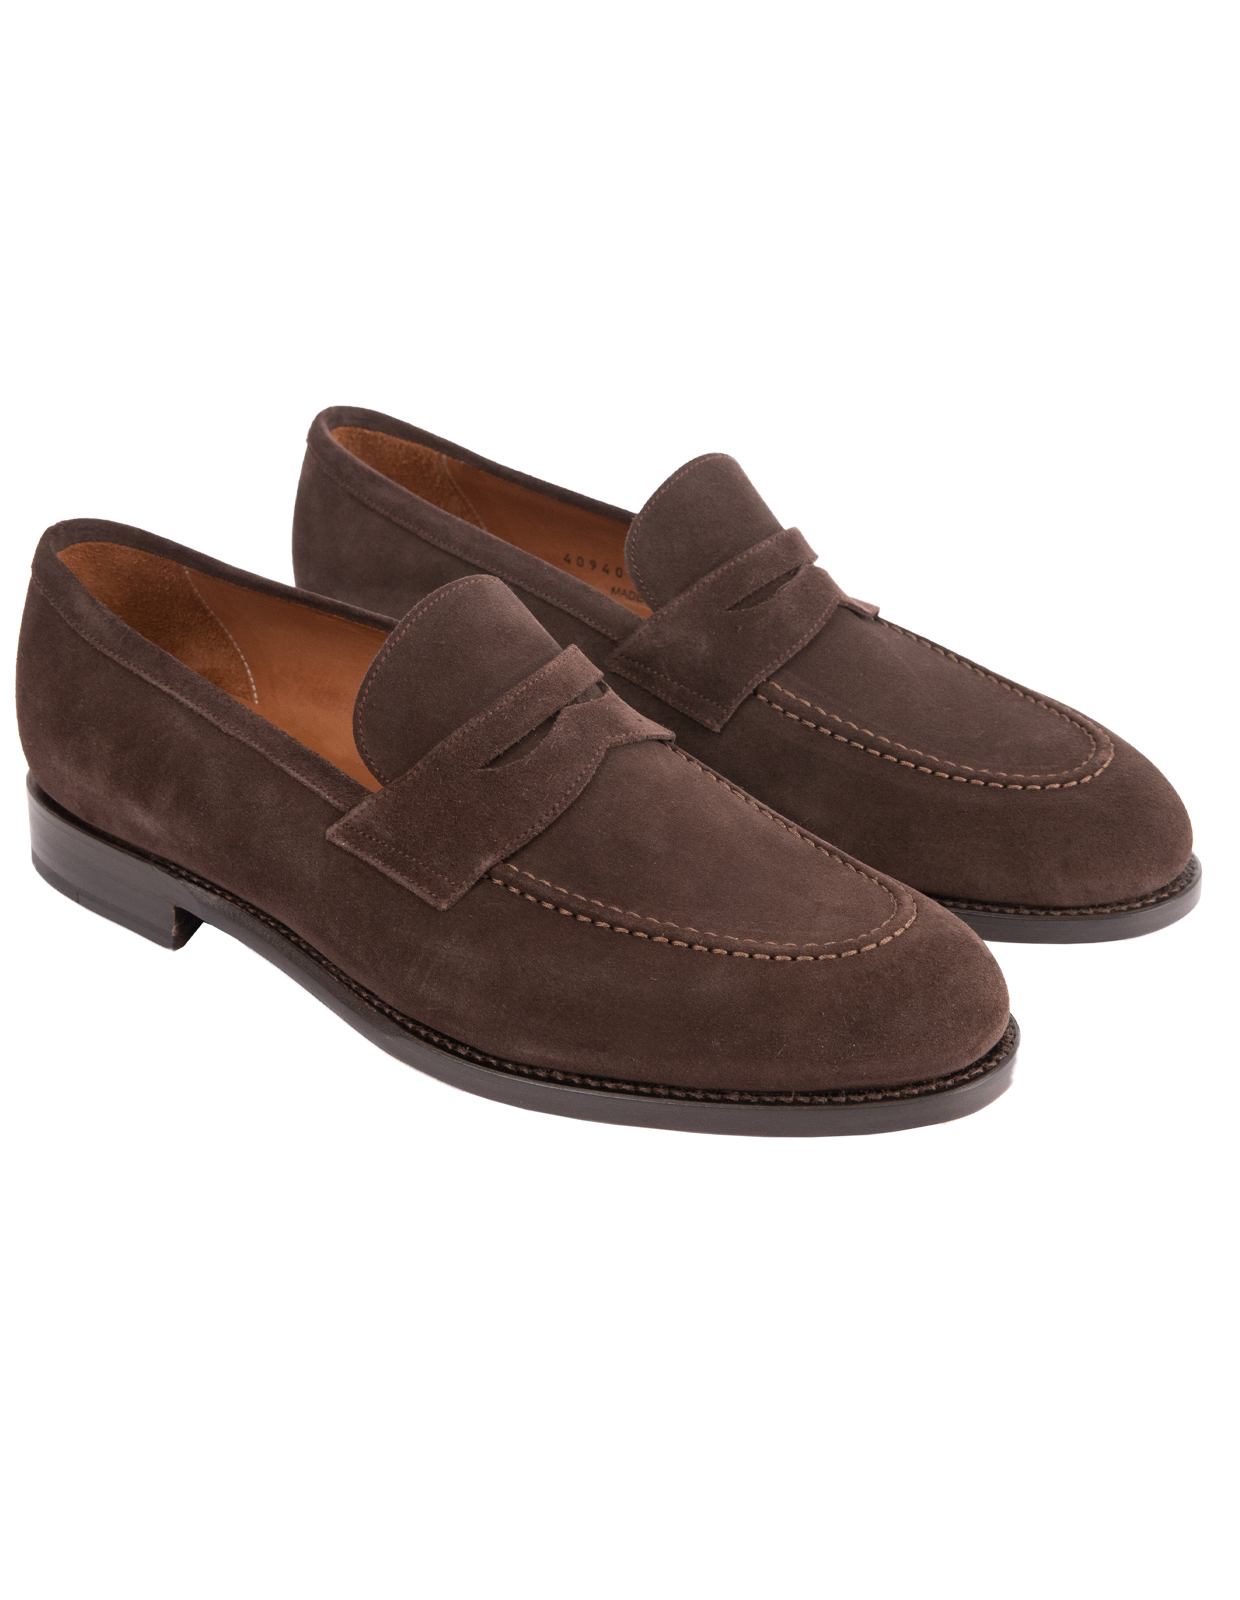 Penny Loafers Suede Bitter Chocolate Stl 8.5